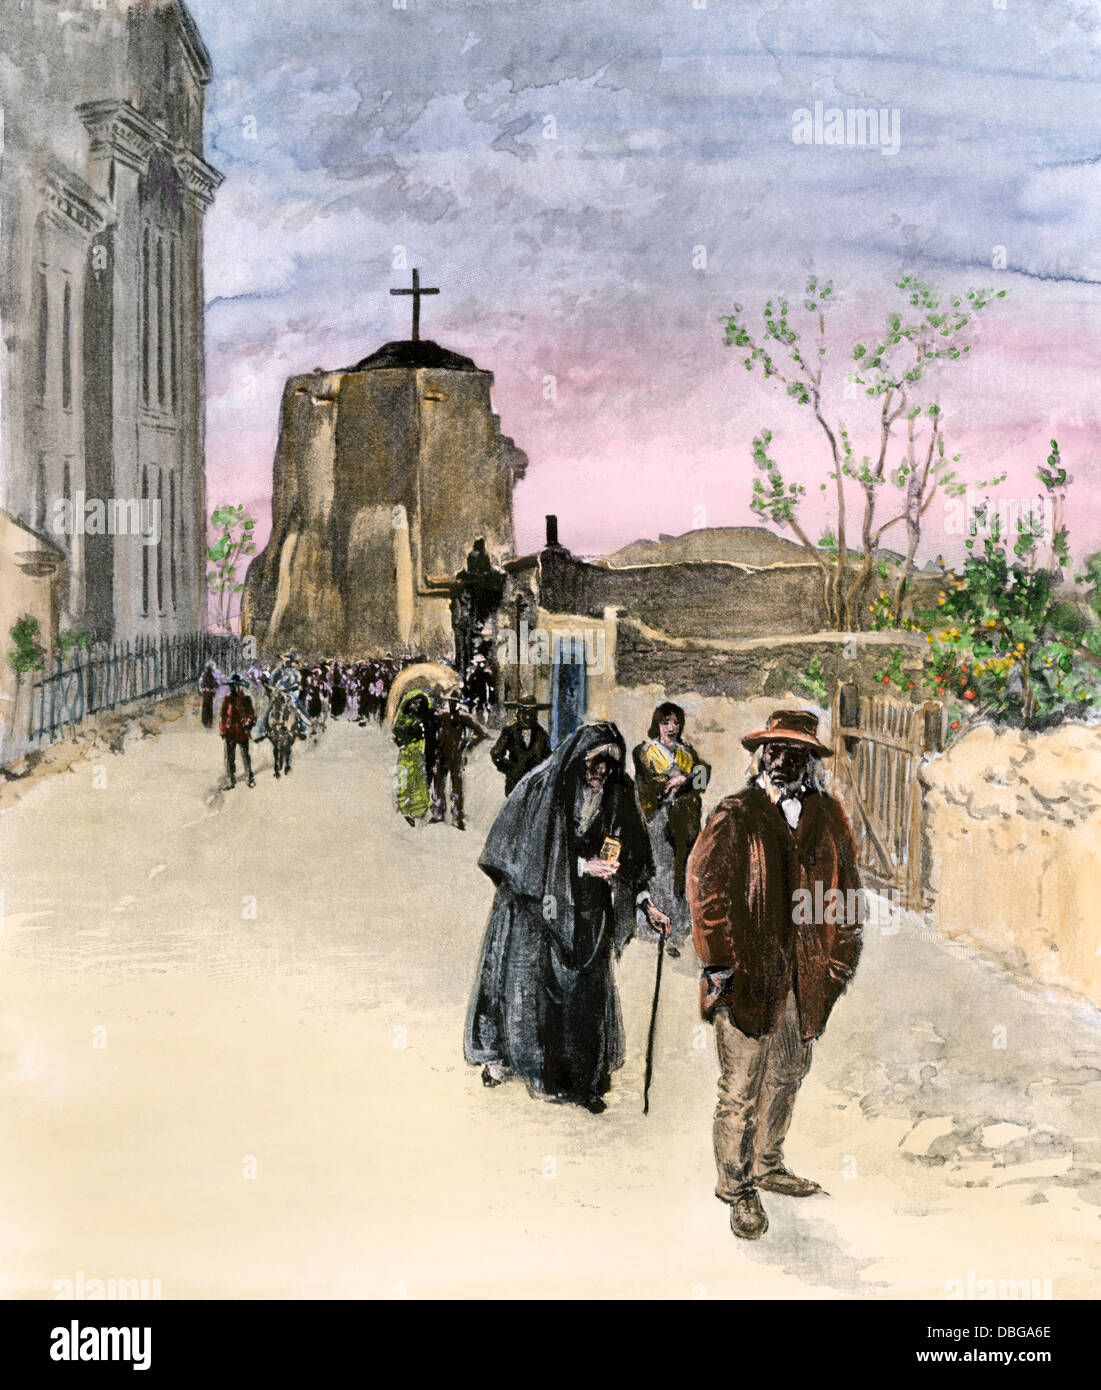 Parishioners leaving San Miguel mission church in Santa Fe NM, 1890s. Hand-colored halftone reproduction of an illustration Stock Photo